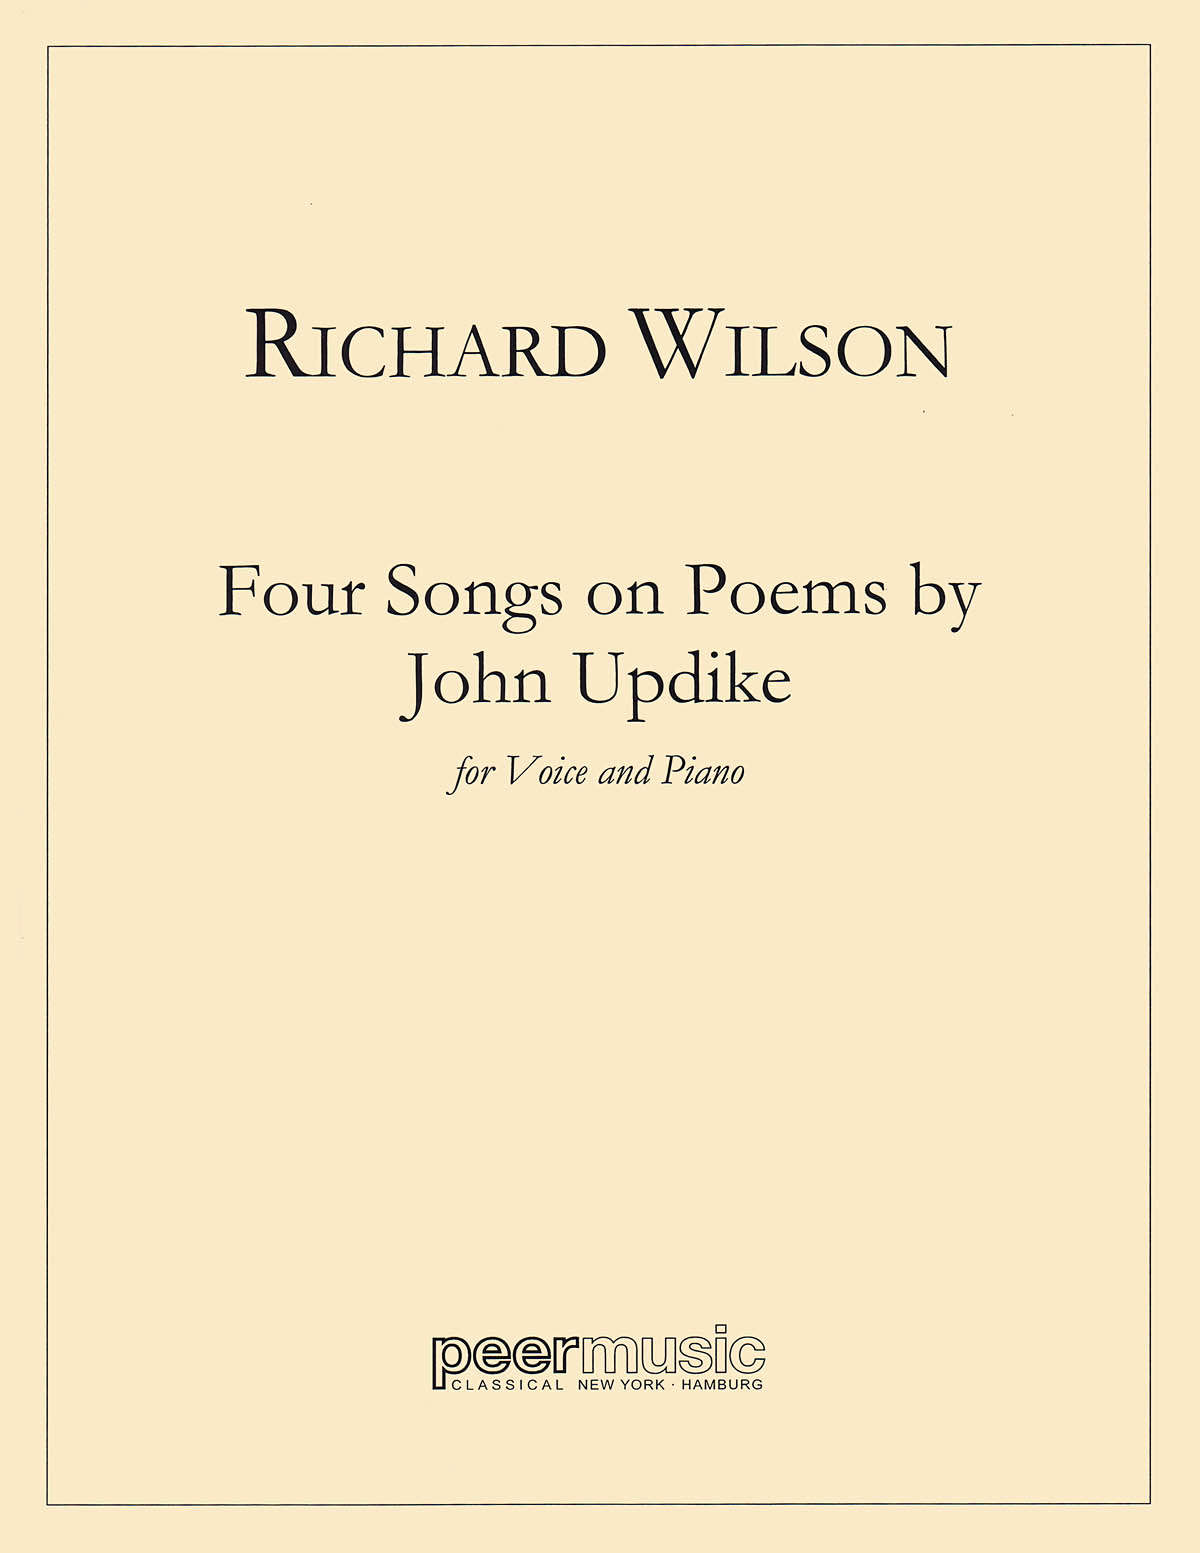 Richard Wilson: Four Songs on Poems of John Updike: Vocal and Piano: Vocal